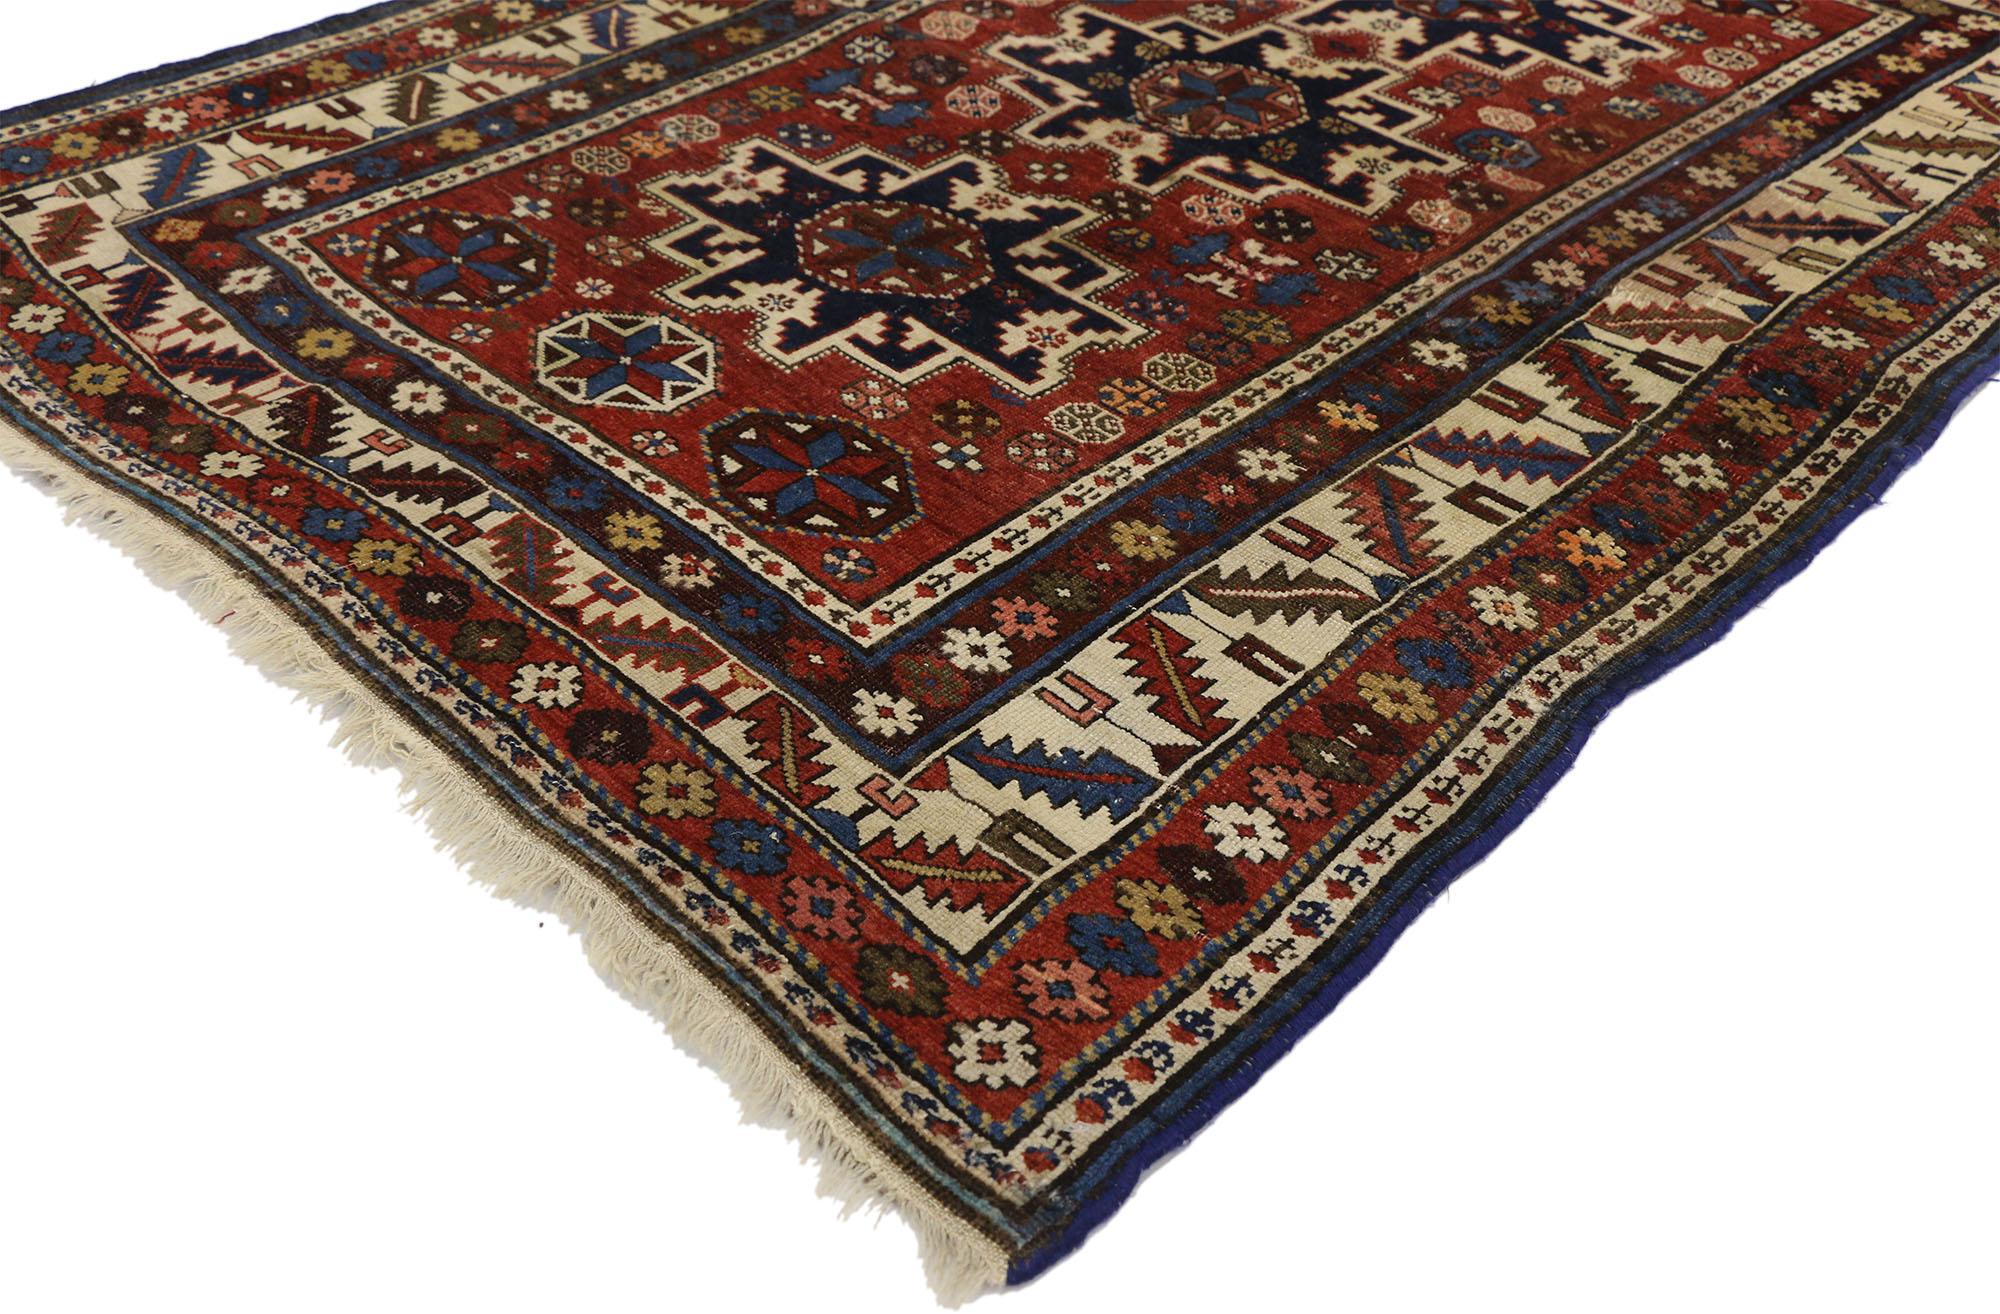 72858, antique Caucasian Shirvan rug Lesghi star. Based on traditional designs from the Caucasus region, this hand-knotted wool antique Caucasian Shirvan rug features three Lesghi Stars surrounded by classic Caucasian motifs representing protection,